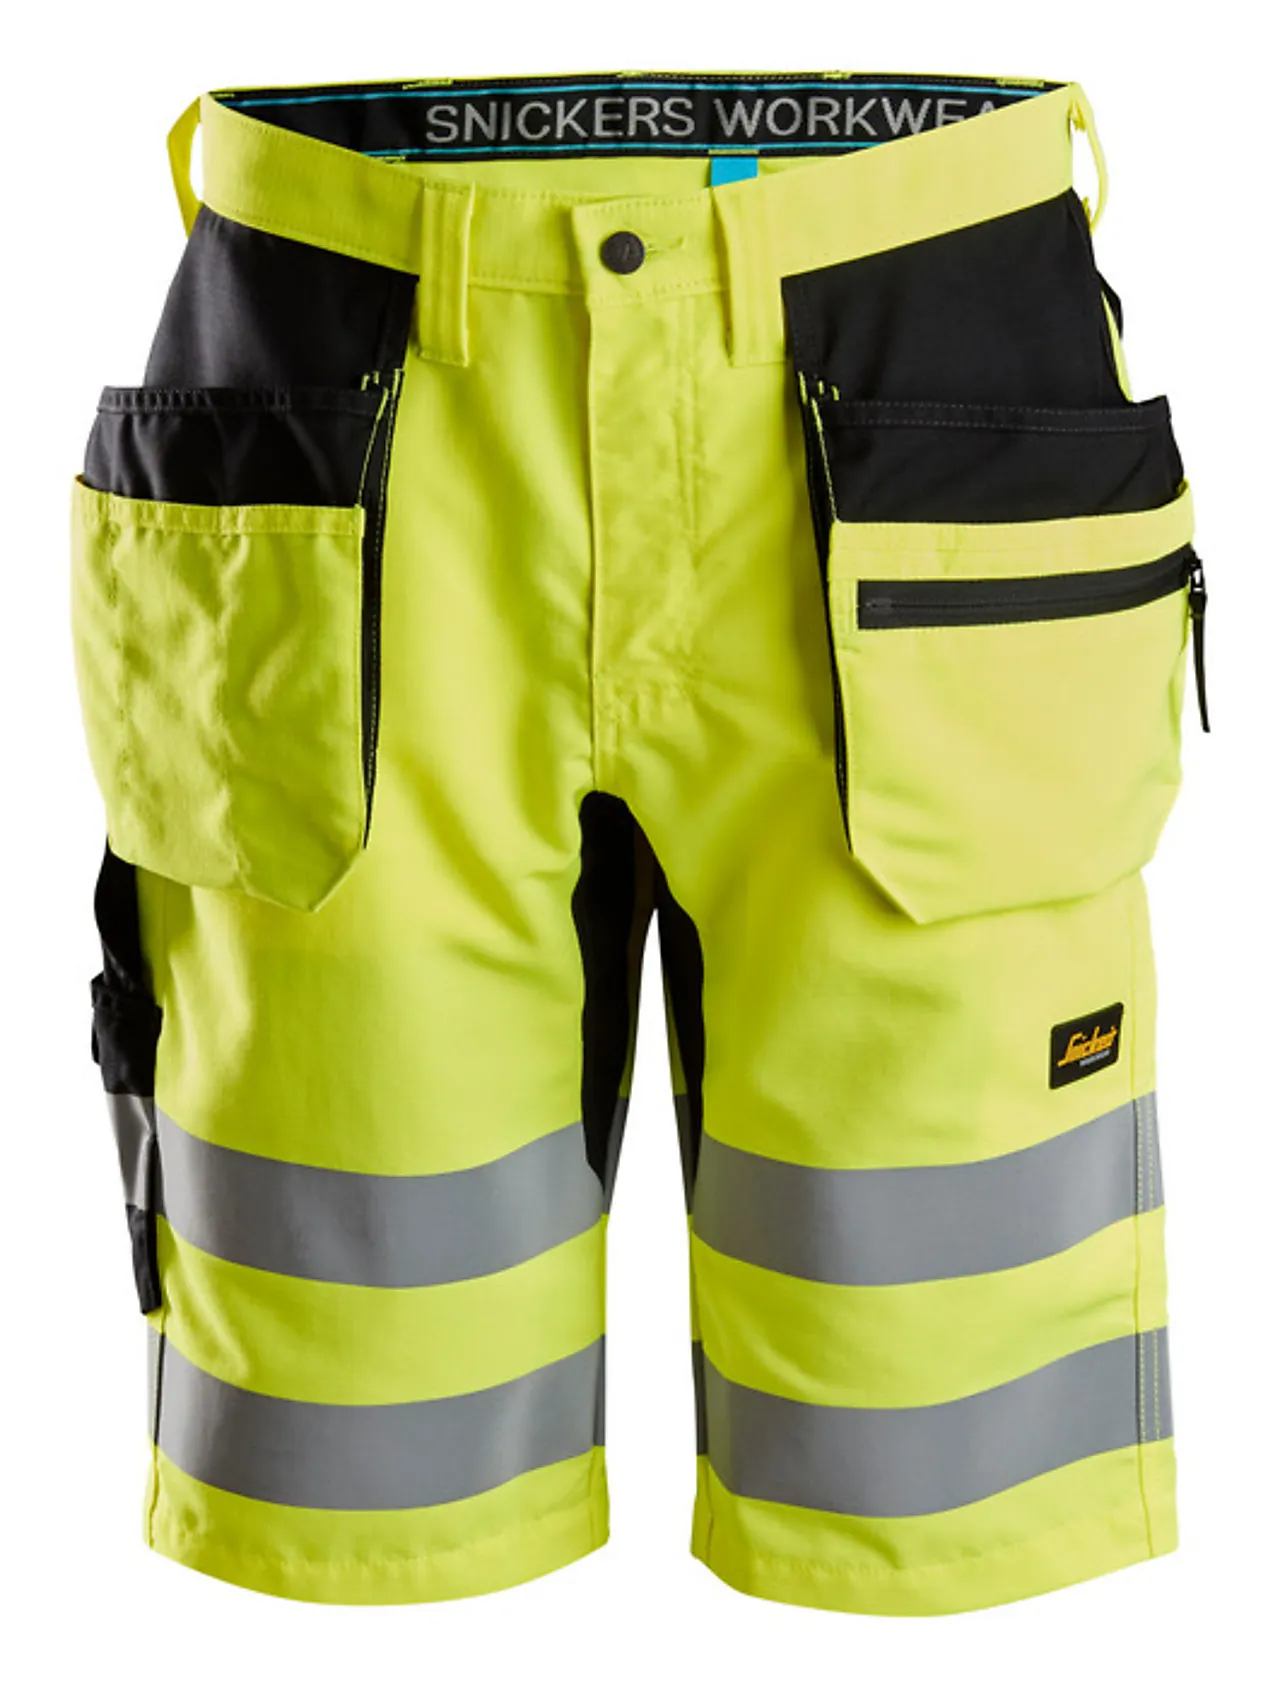 Shorts 6131 hp gul 46 kl1snickers workwear